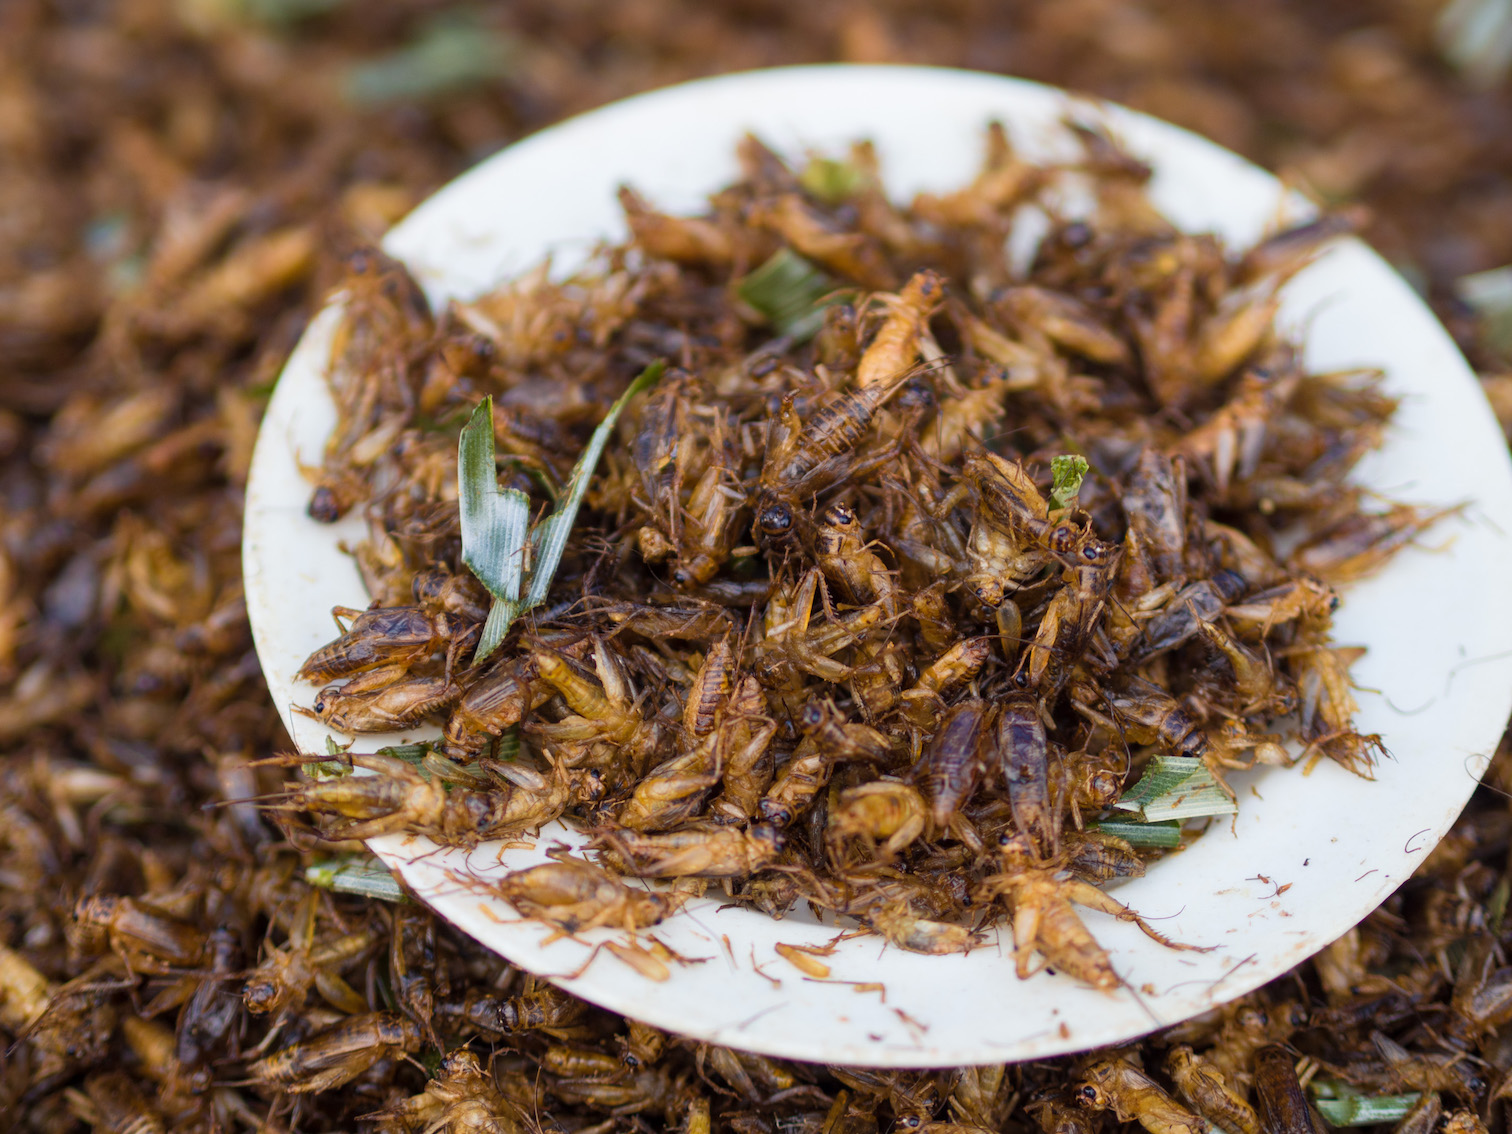 Image: What’s that smell? Big Food corporations are quietly adding crickets and other insects into meal bars, cookies and snacks